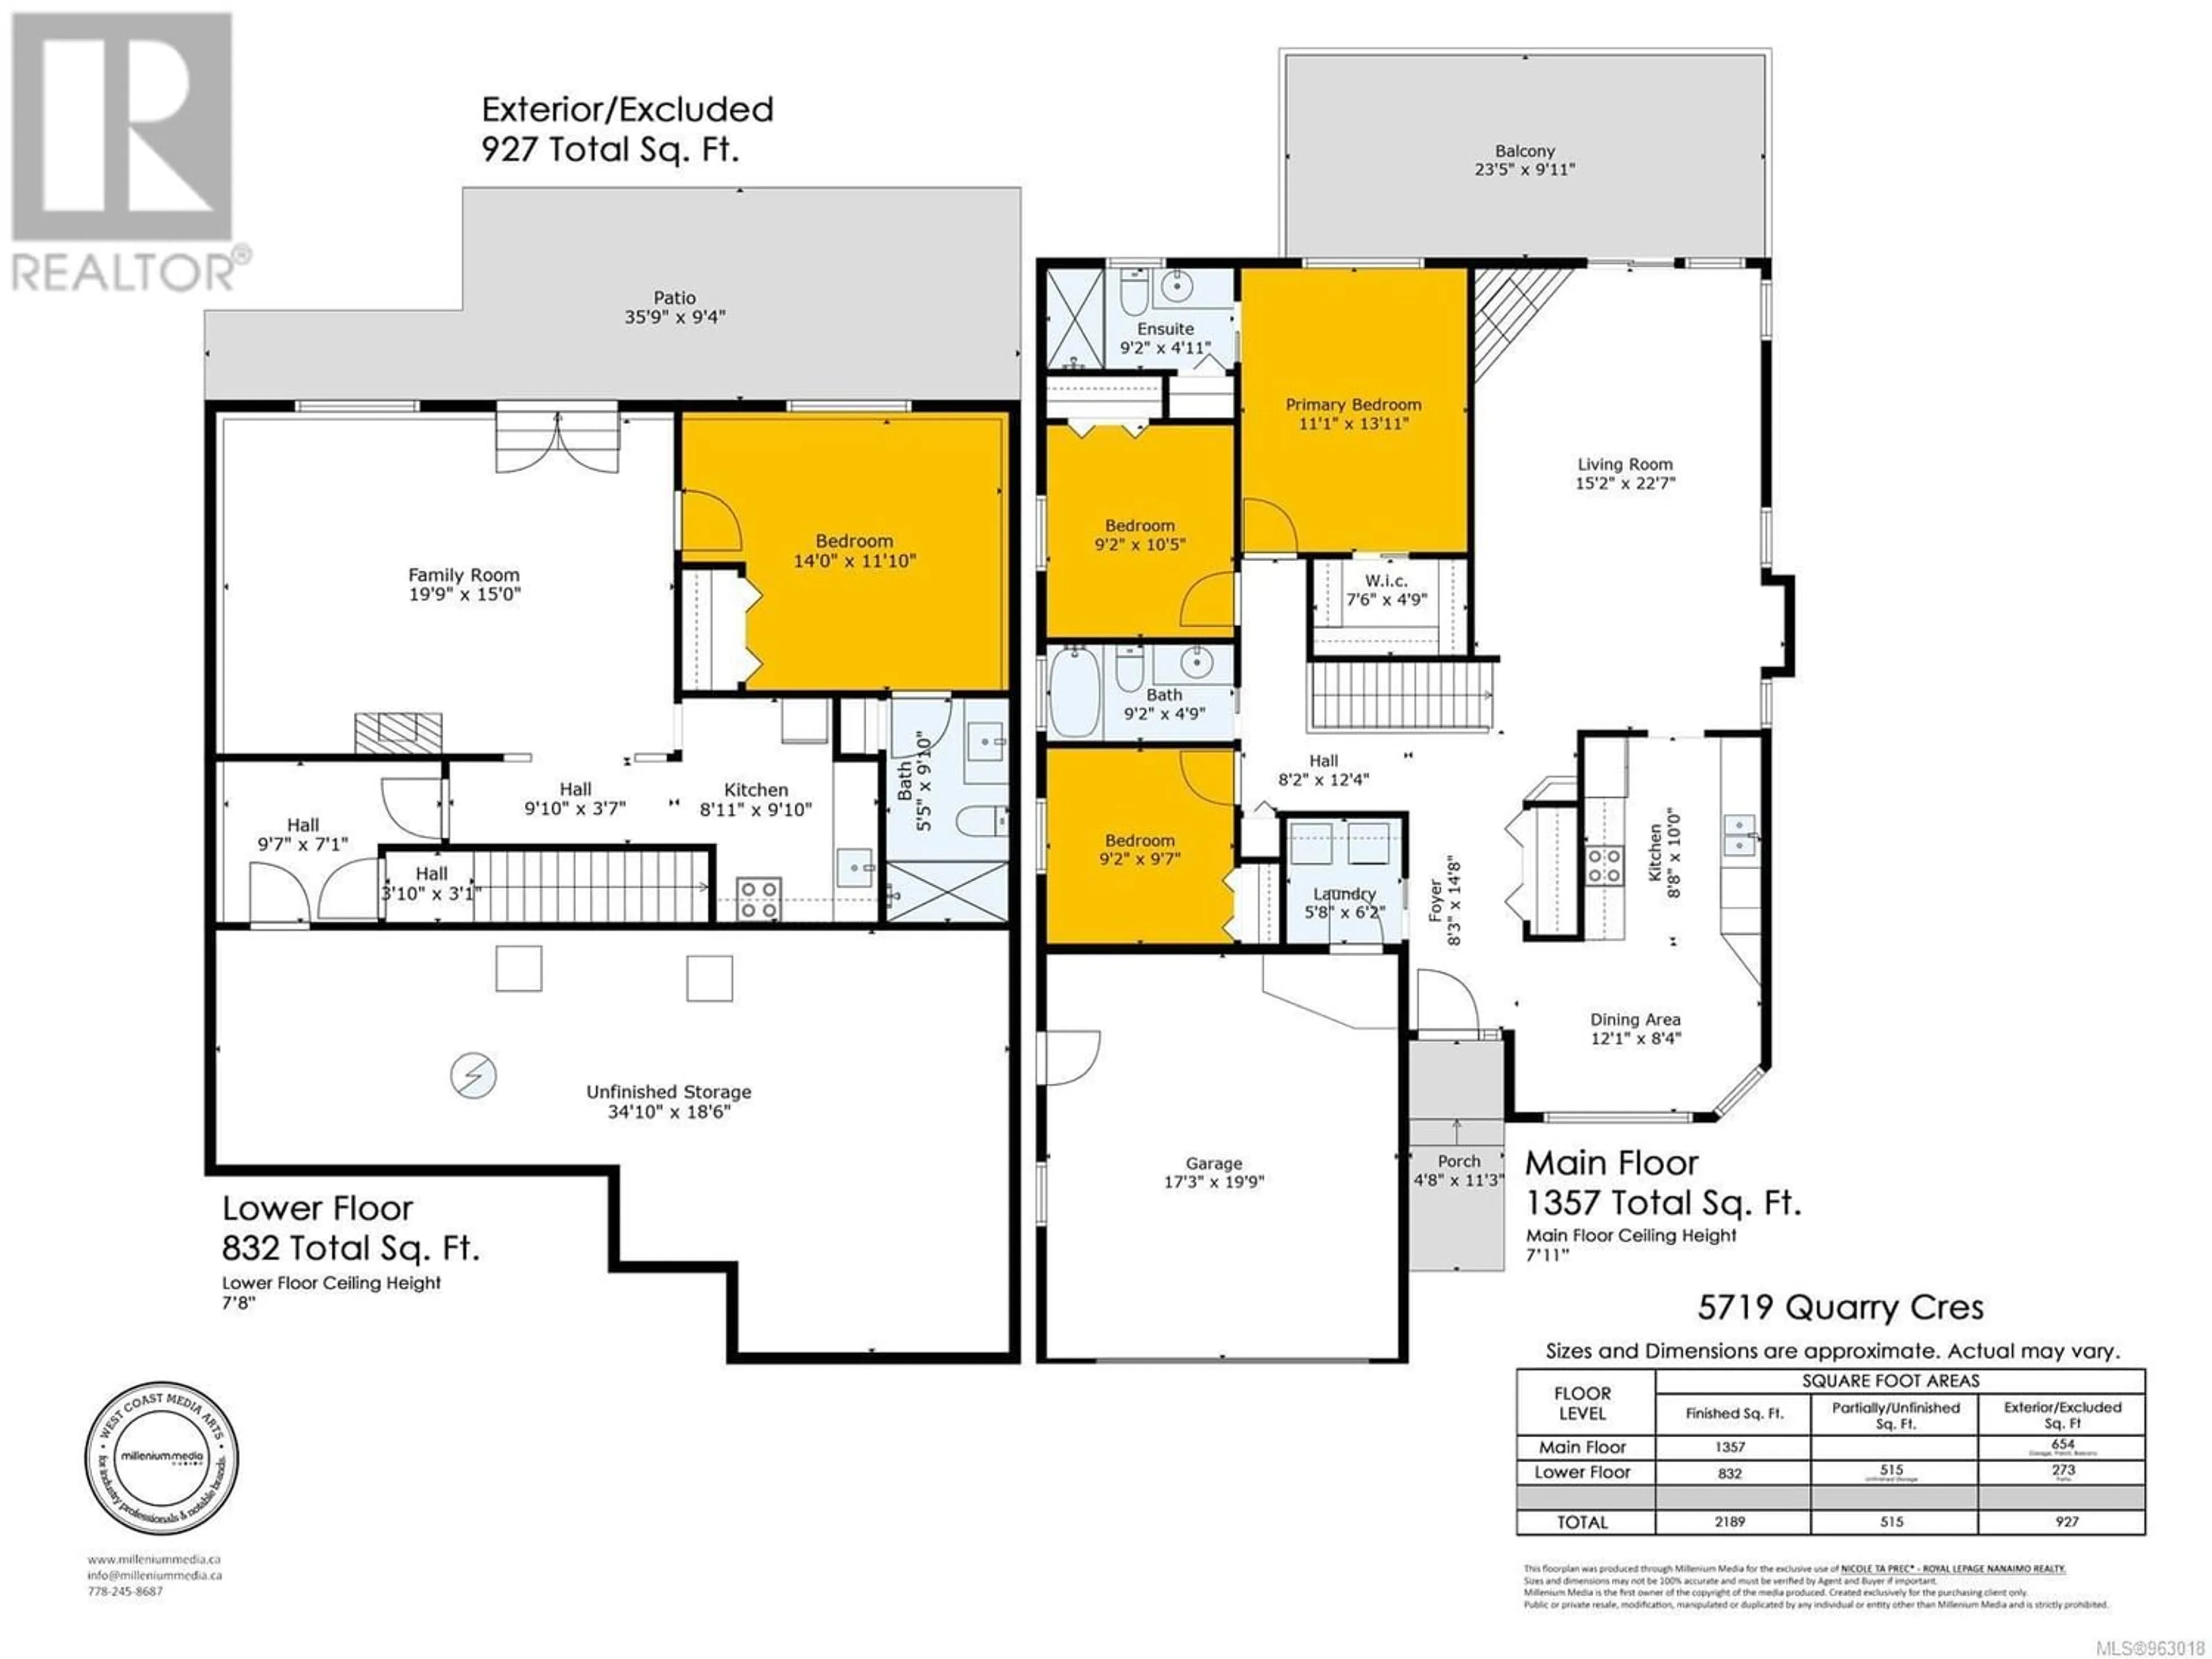 Floor plan for 5719 Quarry Cres, Nanaimo British Columbia V9T6H9